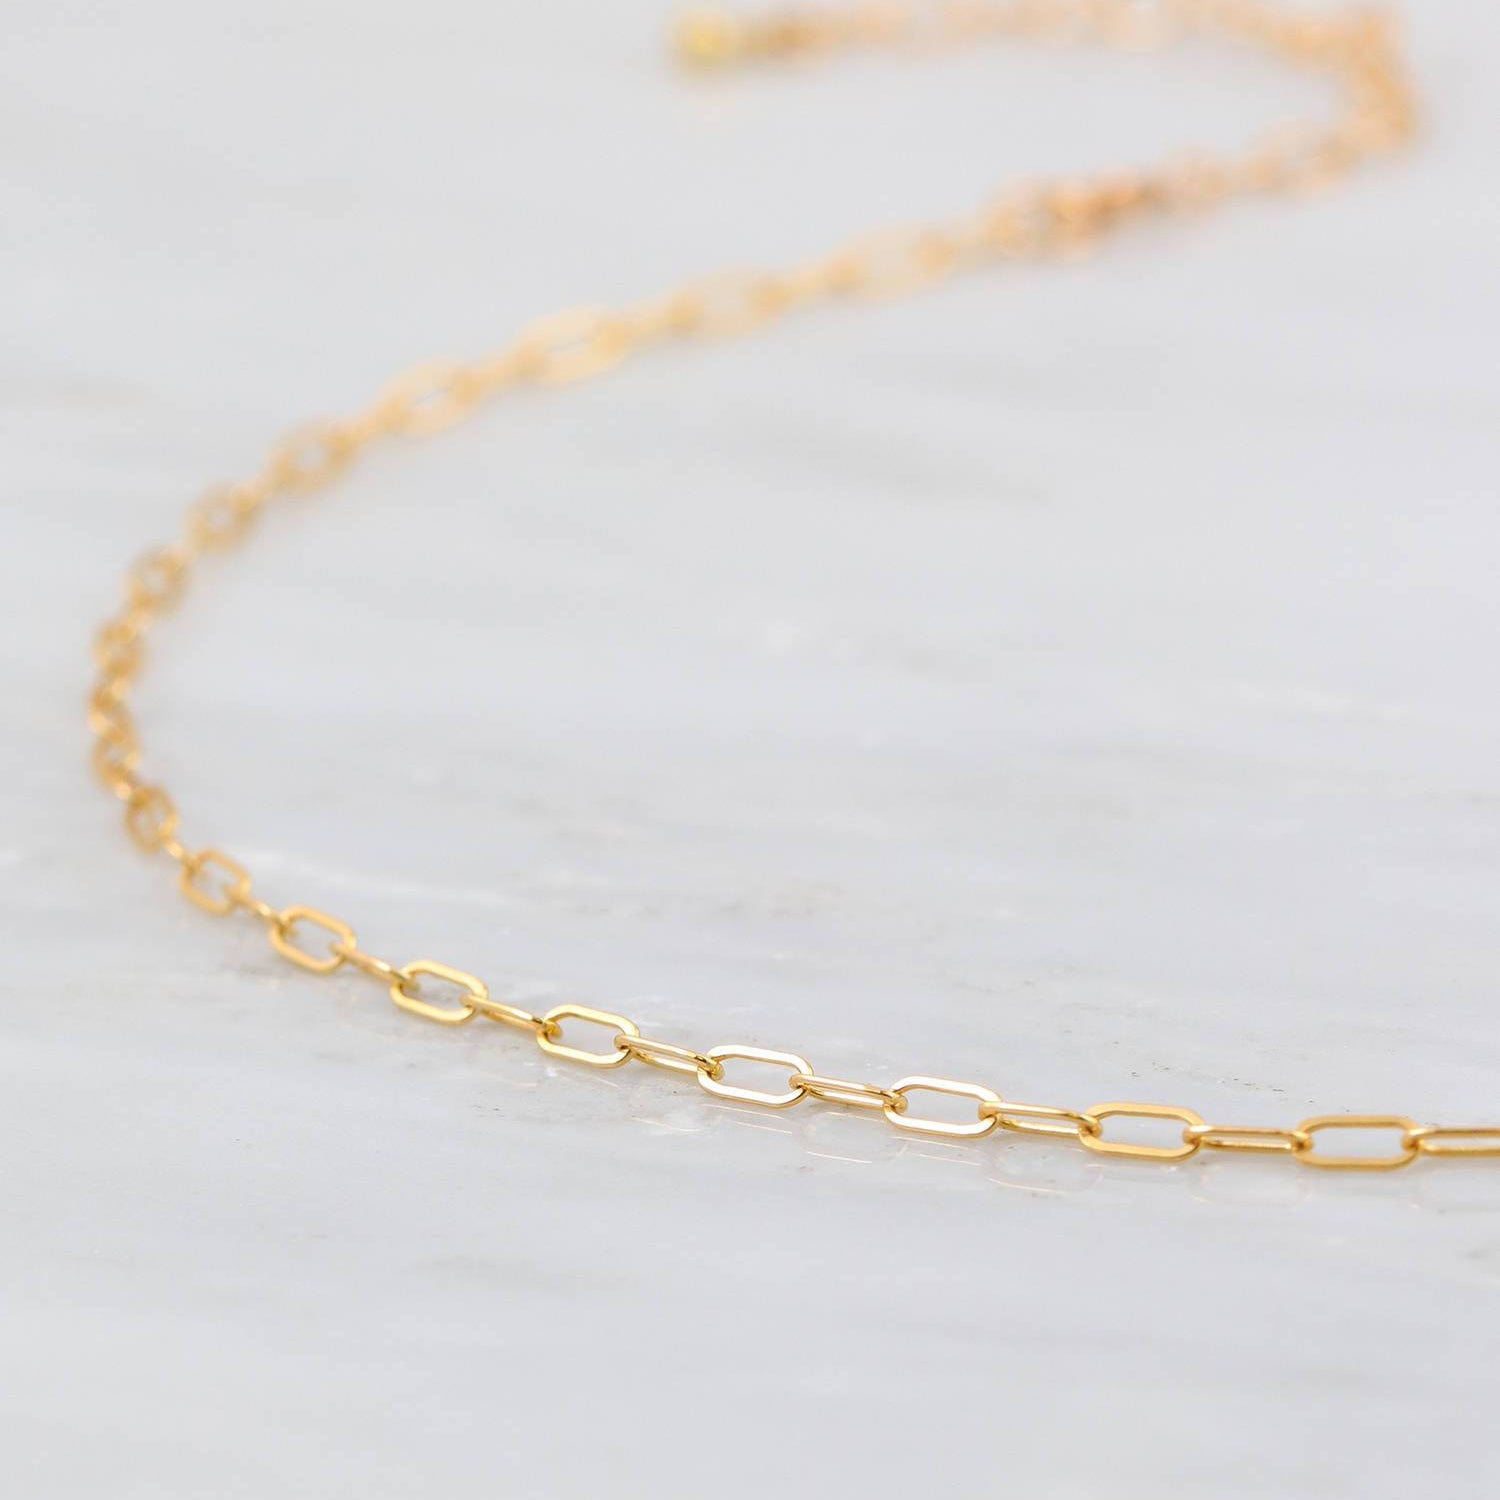 Paperclip Necklace, Delicate Gold Choker